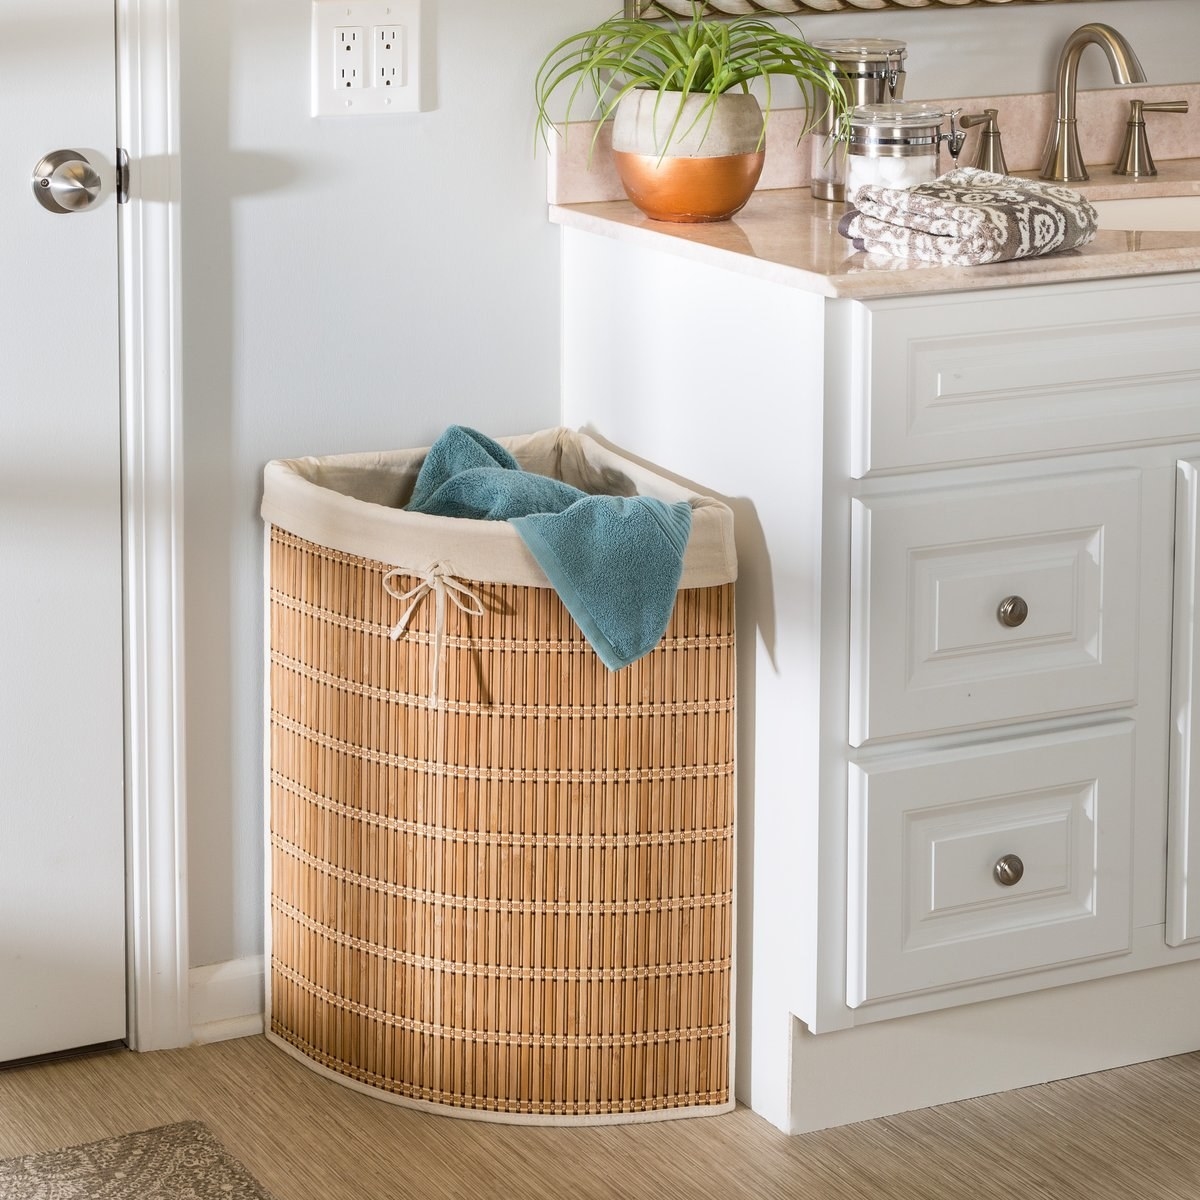 The laundry hamper with a towel in it, set in the corner of a room next to a countertop and a door